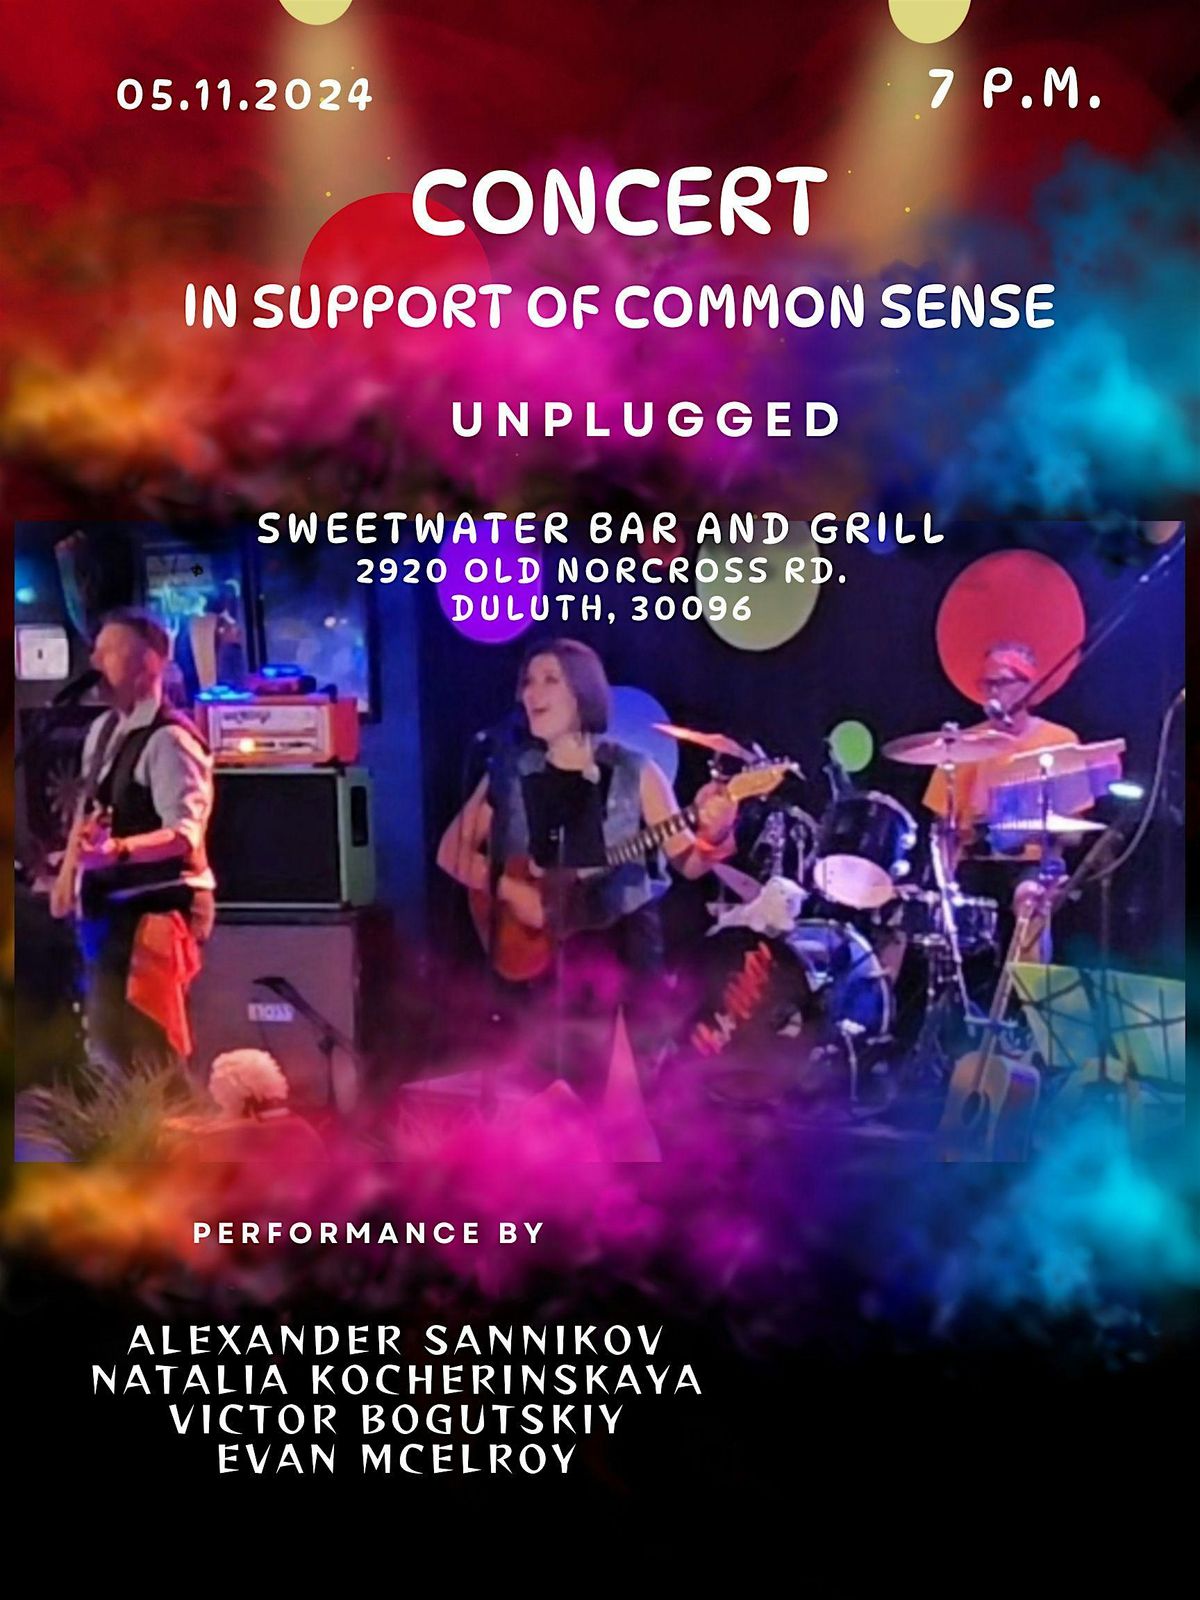 Concert in Support of Common Sense - UNPLUGGED